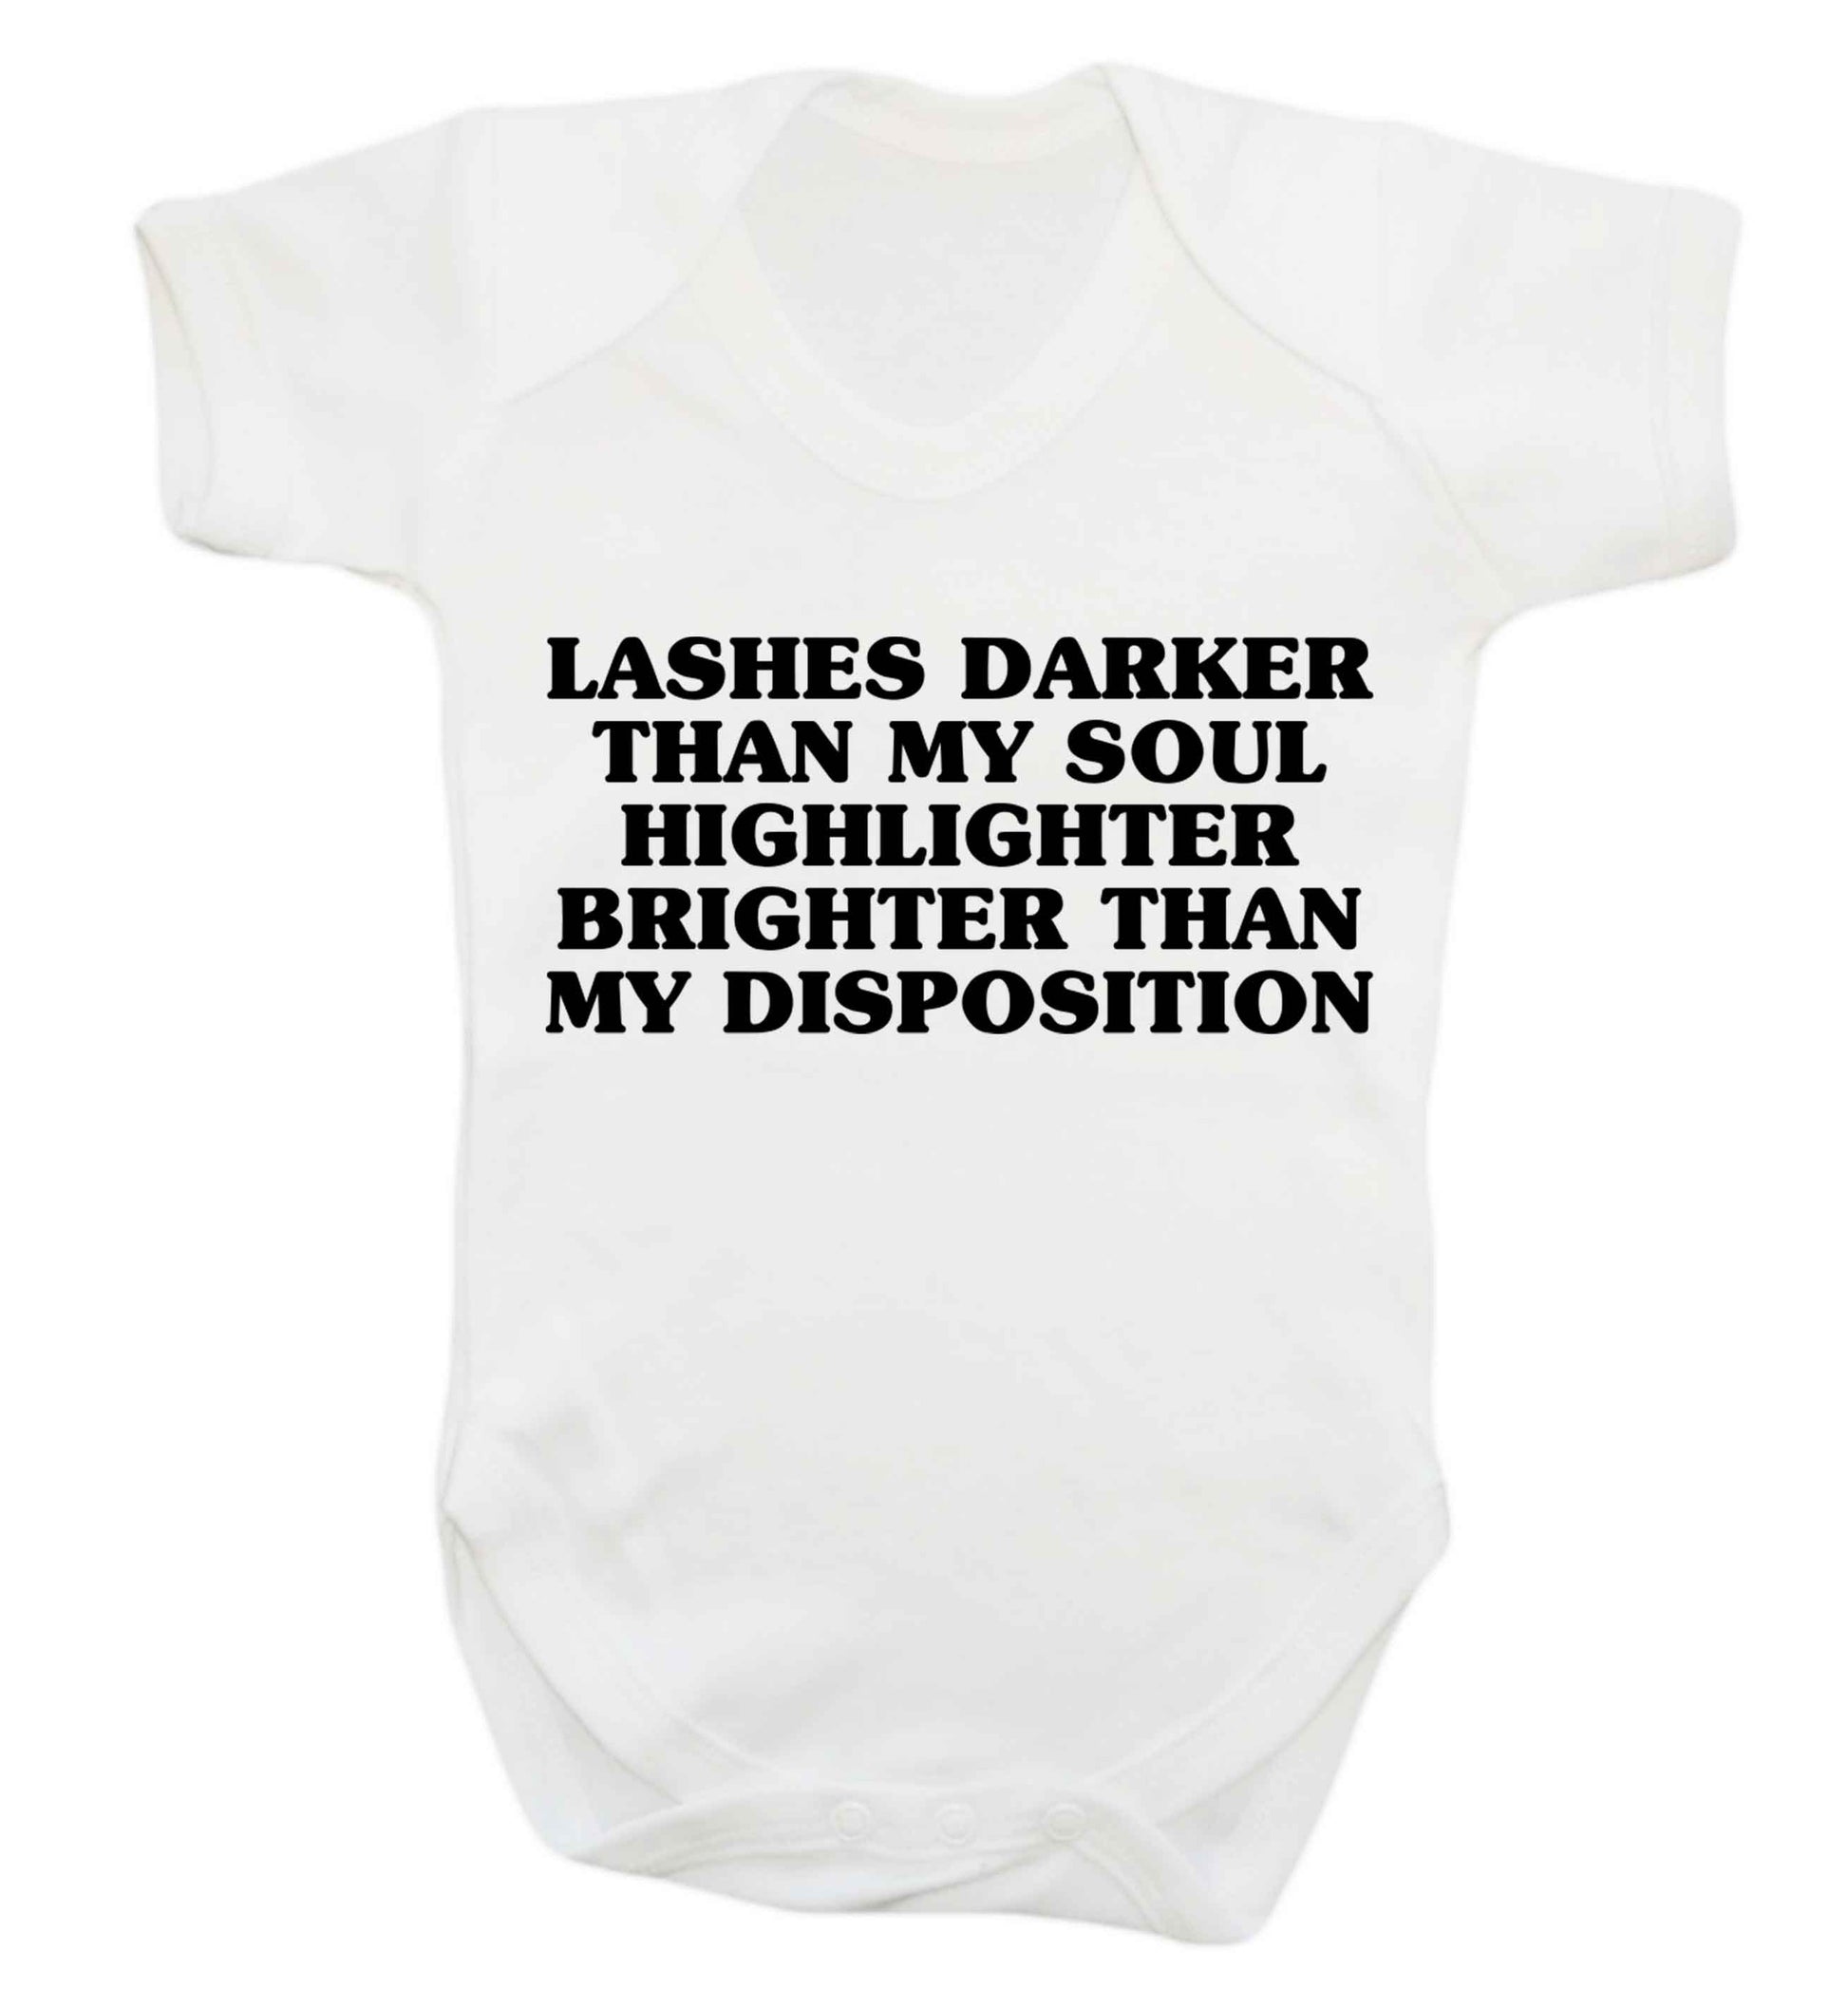 Lashes darker than my soul, highlighter brighter than my disposition Baby Vest white 18-24 months